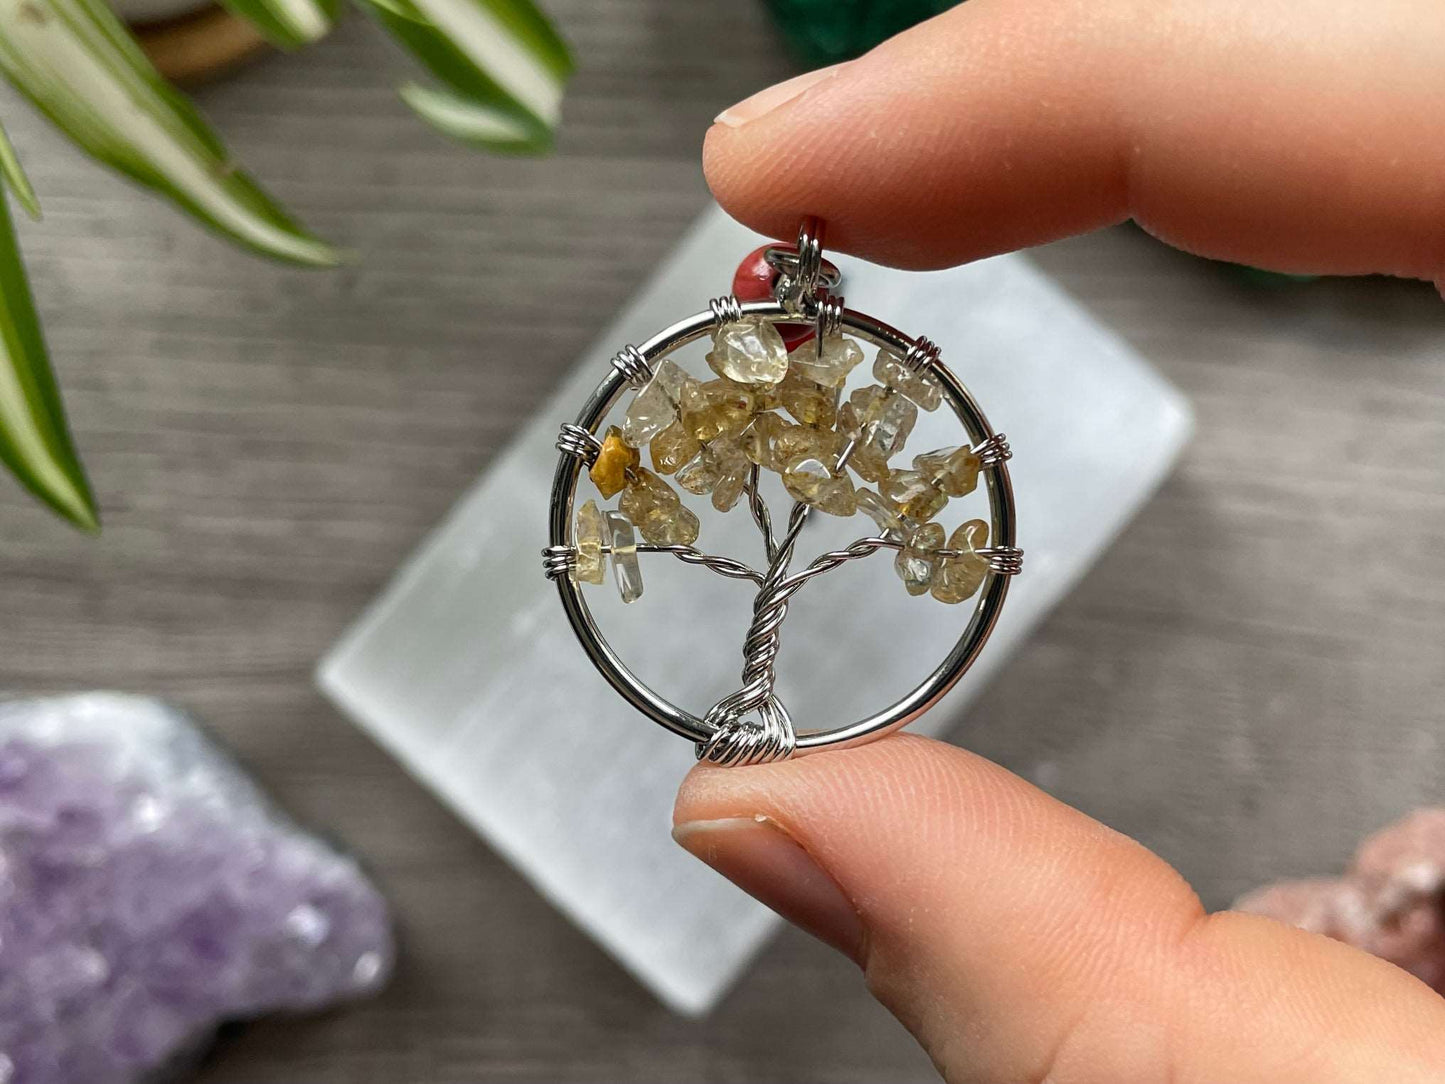 A tree of life with citrine crystals as the leaves on the tree is in the image. The keychain has a number of small multi-coloured beads to represent the chakras on the chain. The keychain sits atop a slab of selenite. Malachite, pink amethyst, and amethyst are nearby.